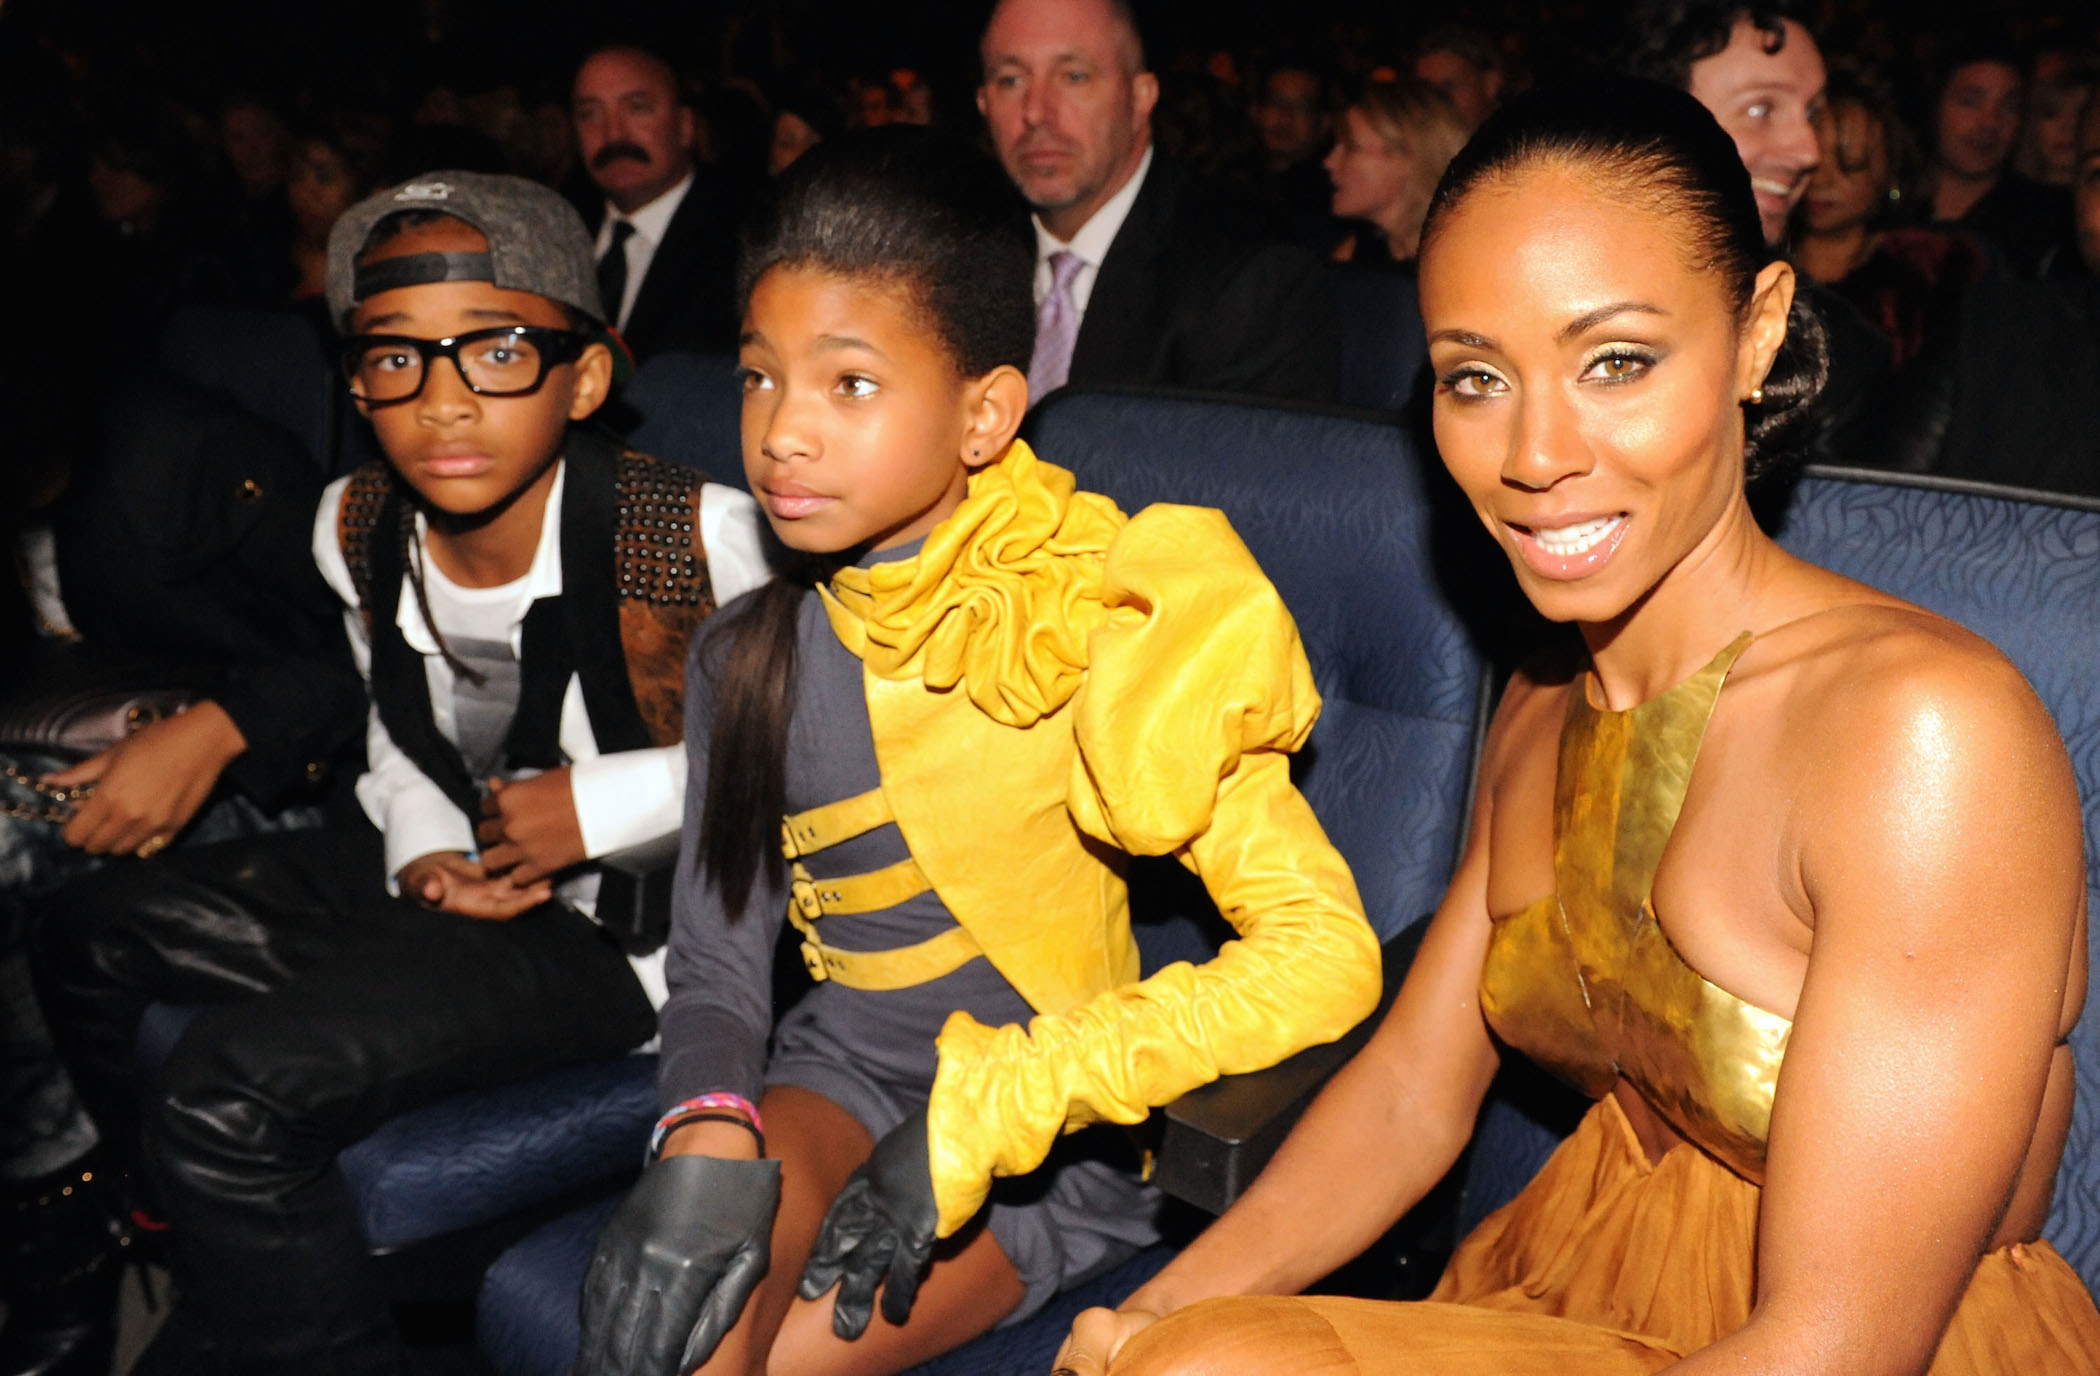 (L-R) Jaden Smith, Willow Smith, and Jada Pinkett Smith pose in the audience at the 2010 American Music Awards